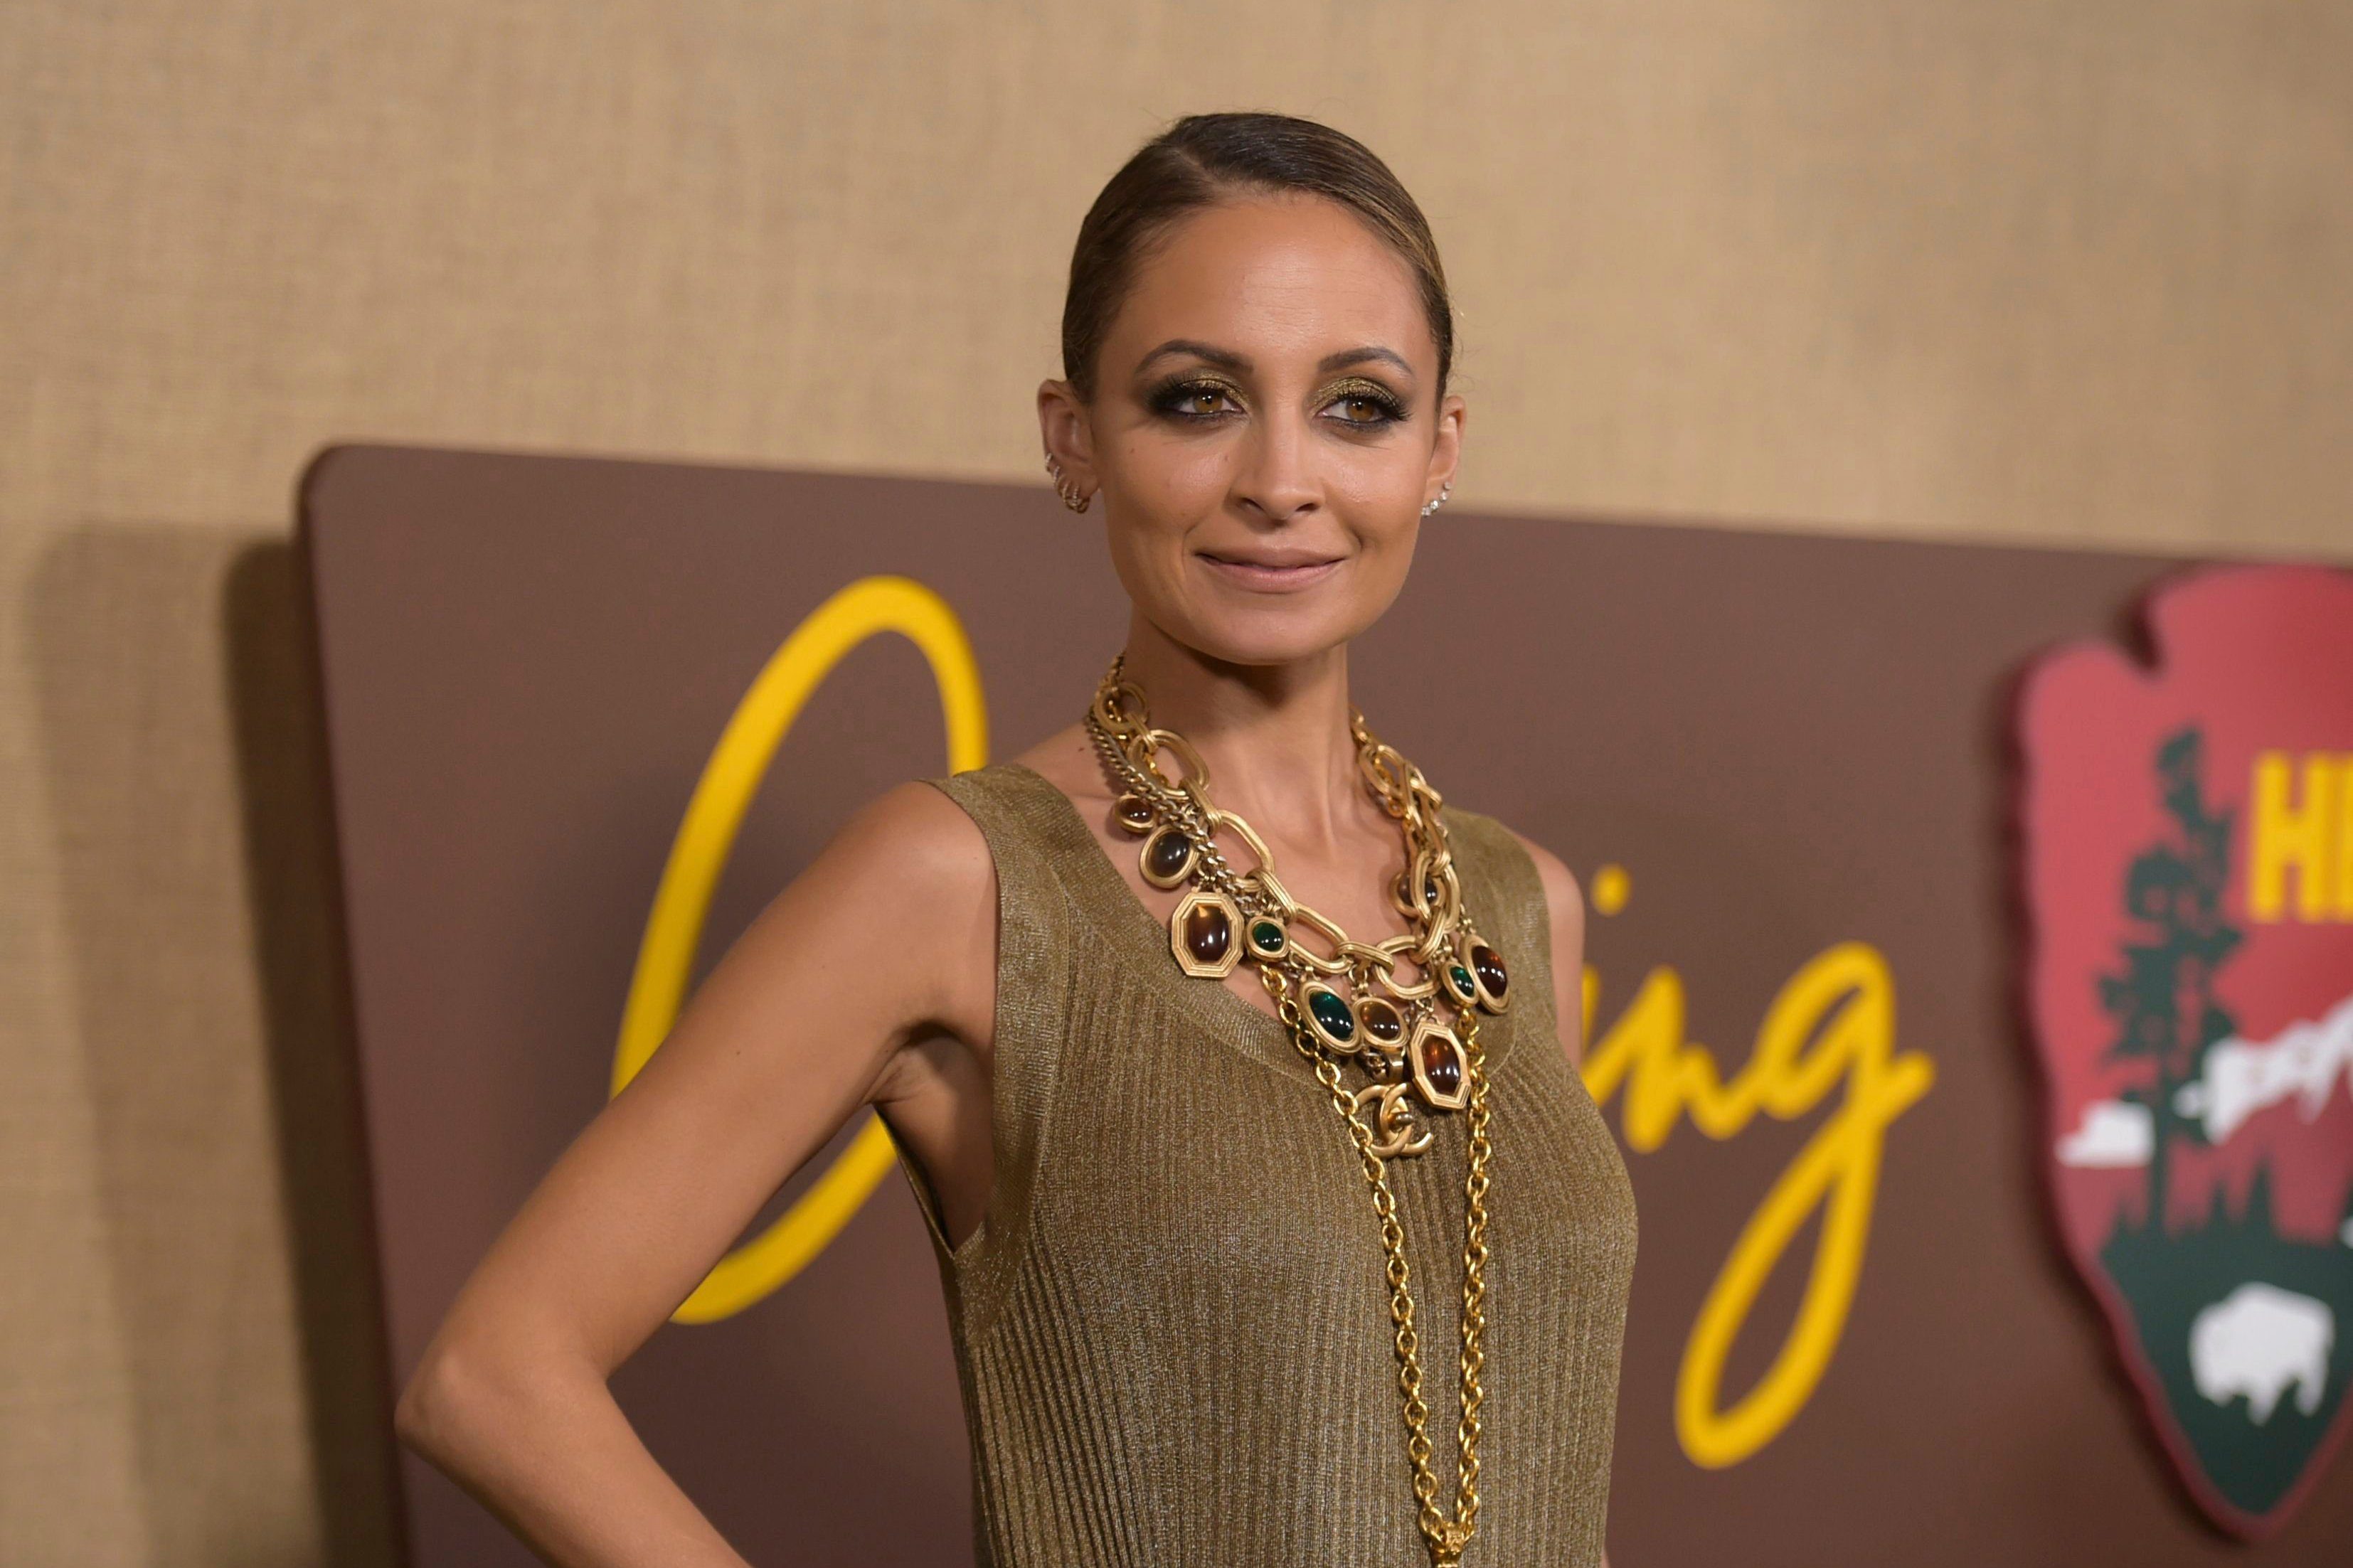 Mandatory Credit: Photo by Richard Shotwell/Invision/AP/Shutterstock (9921912cl) Nicole Richie arrives at the Los Angeles premiere of "Camping", at Paramount Studios LA Premiere of "Camping", Los Angeles, USA - 10 Oct 2018